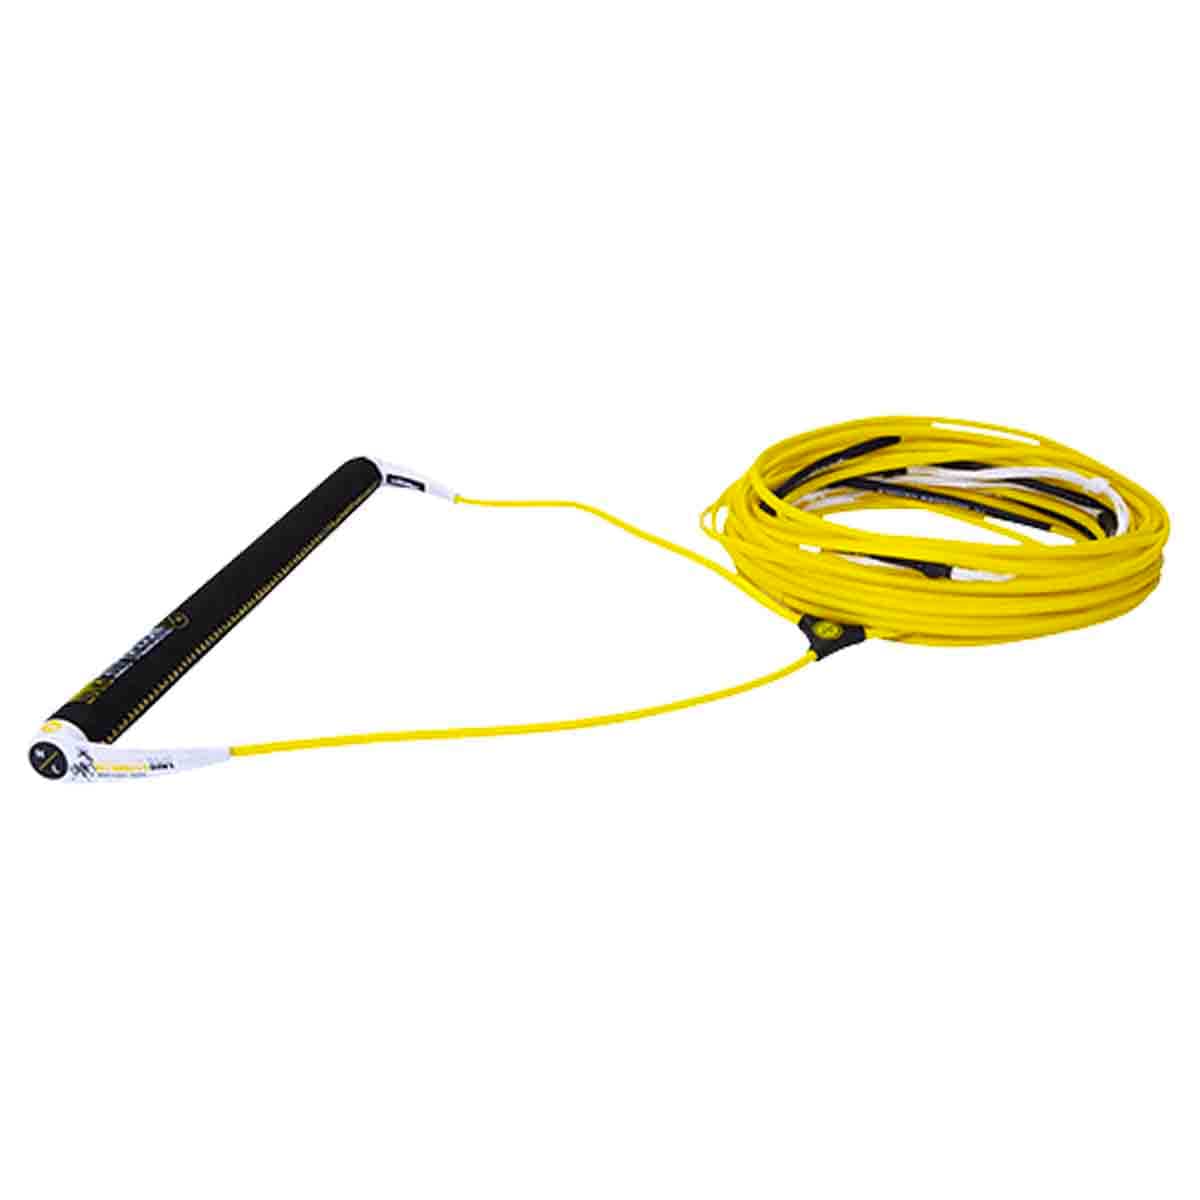 Hyperlite Riot w/ Floating Silicone Flat Line Rope and Handle Package HYPERLITE